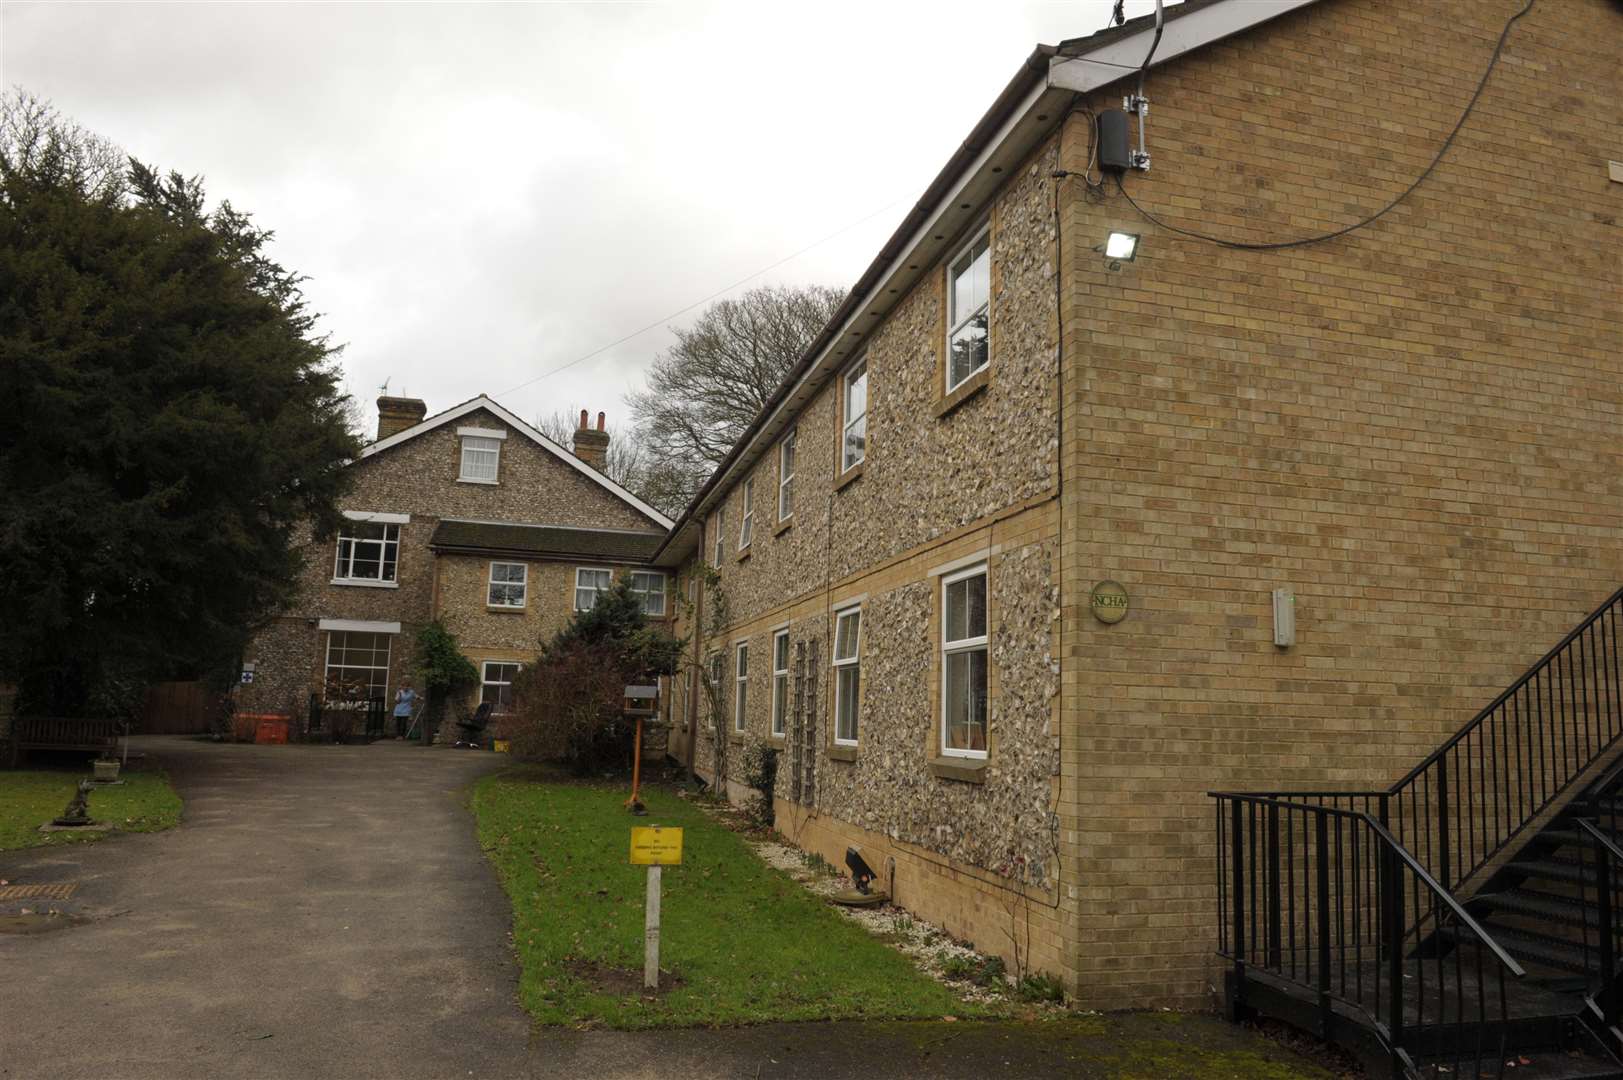 Abbey Court Nursing Home has been put in special measures